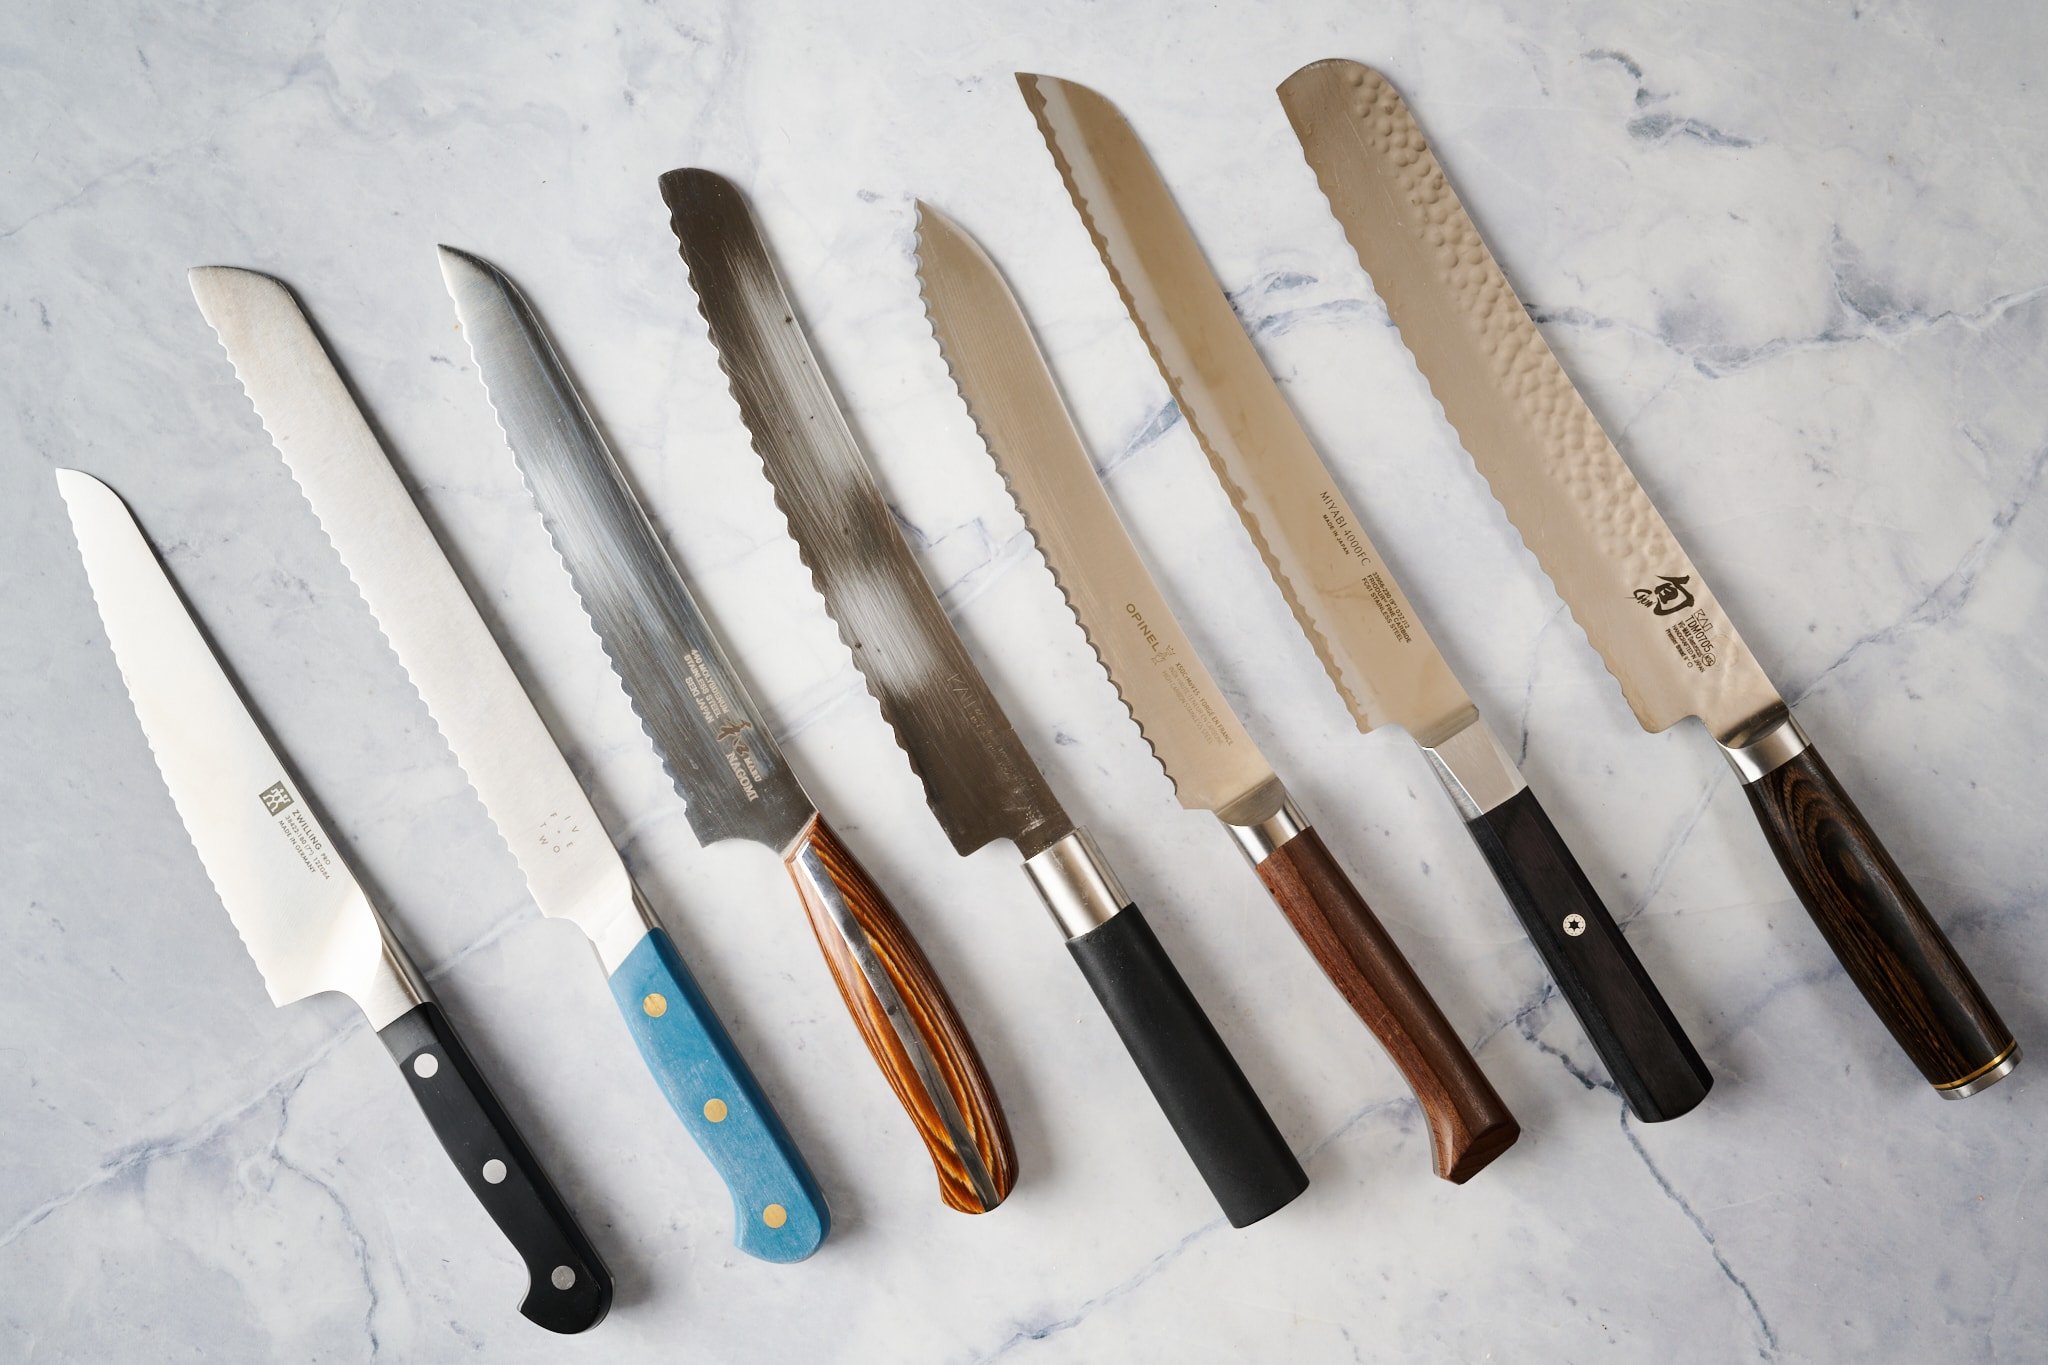 Expert Reviews Of Electric Knives That Make The Cut